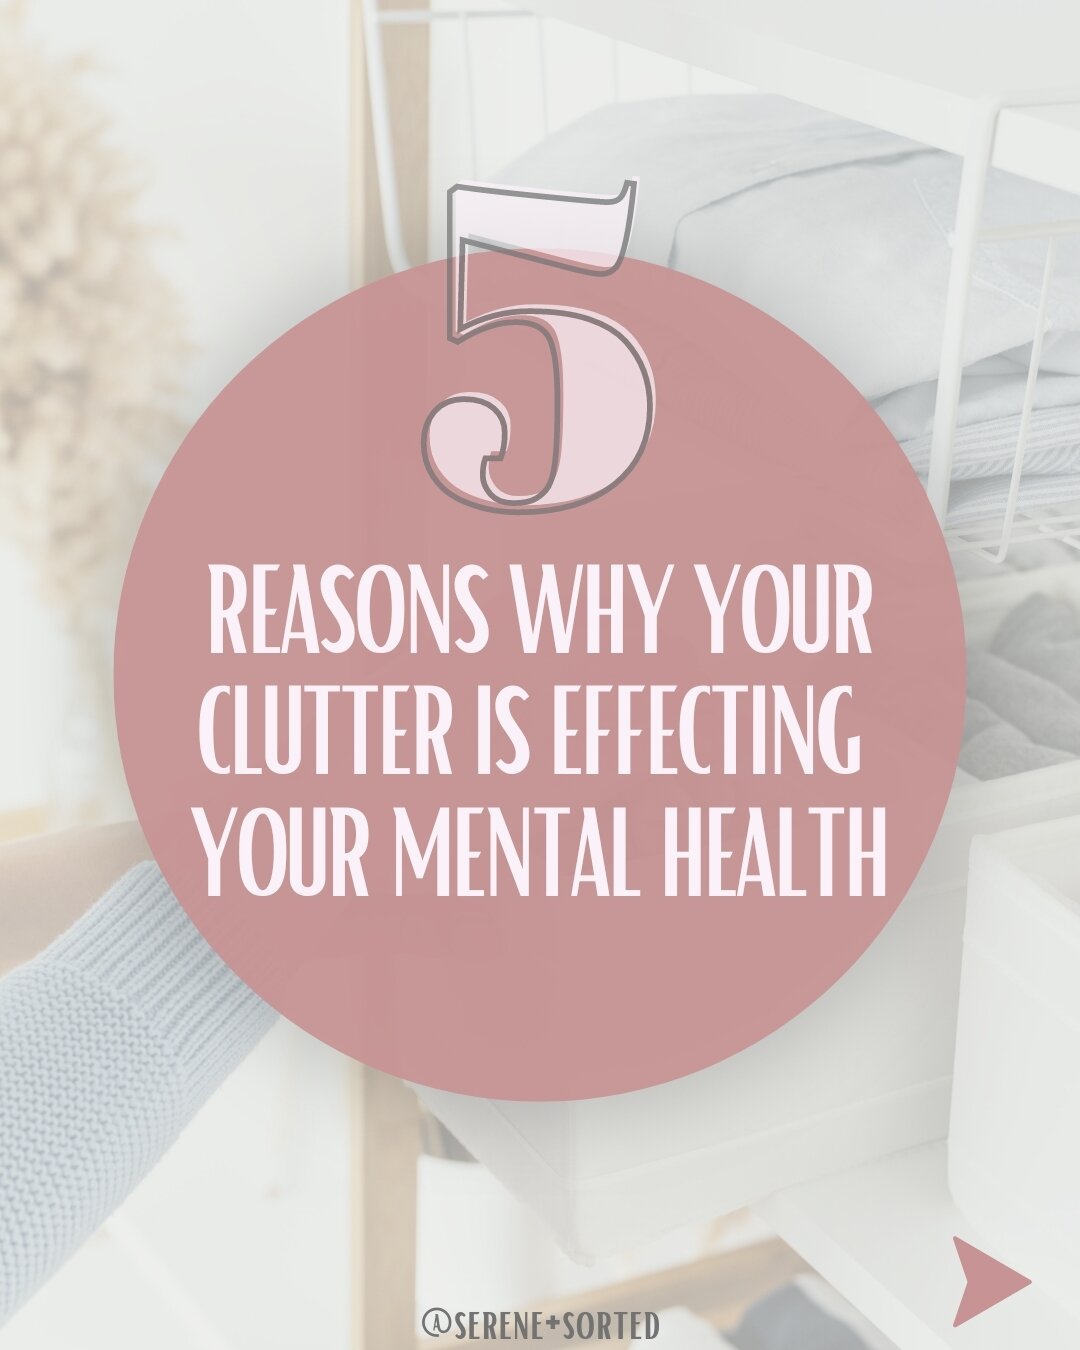 We&rsquo;ve all been there &mdash; that dreaded feeling of the walls closing in when your kitchen counters are covered, your hallway is clogged, and you can&rsquo;t find anything!

We may not all be aware, but physical clutter significantly impacts y